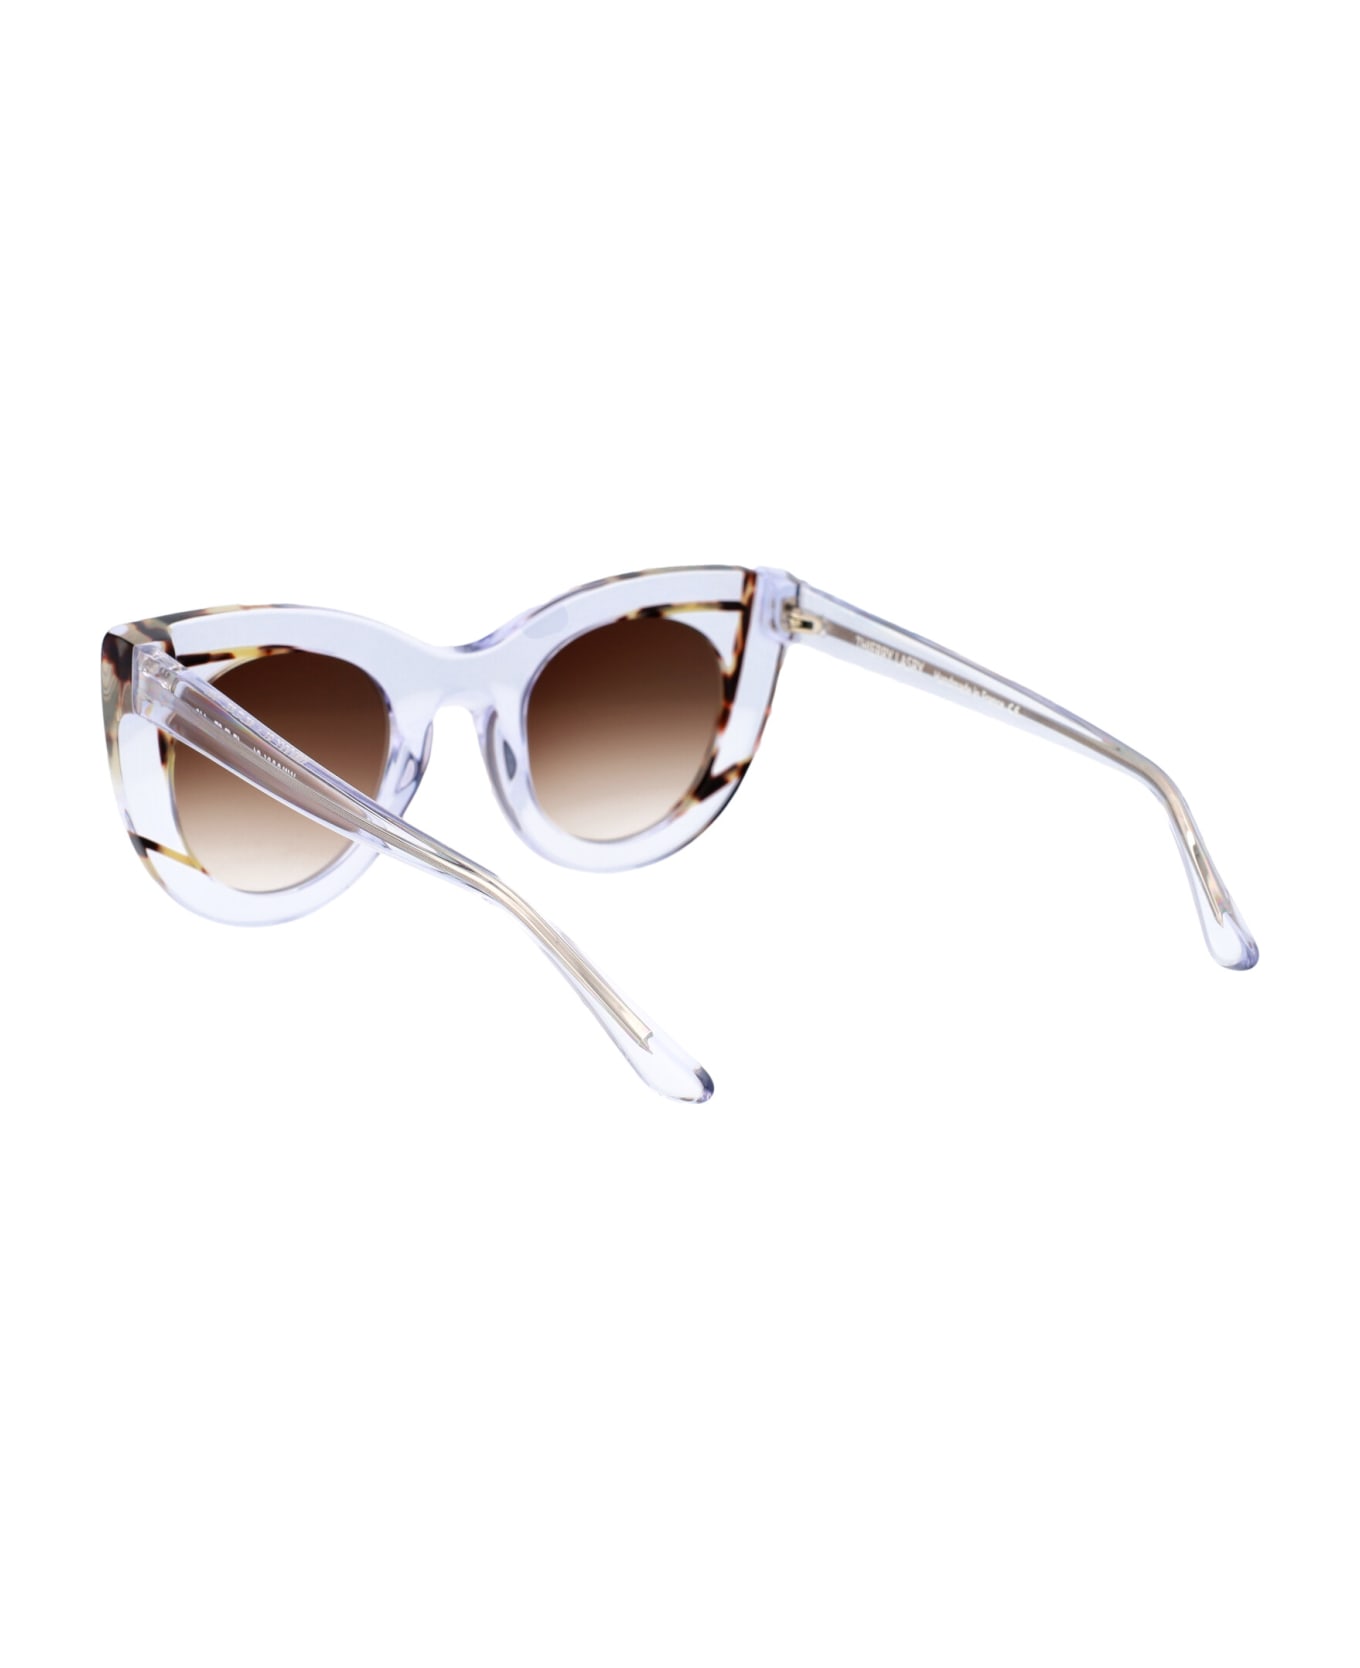 Thierry Lasry Wavvvy Sunglasses - 01 CRYSTAL